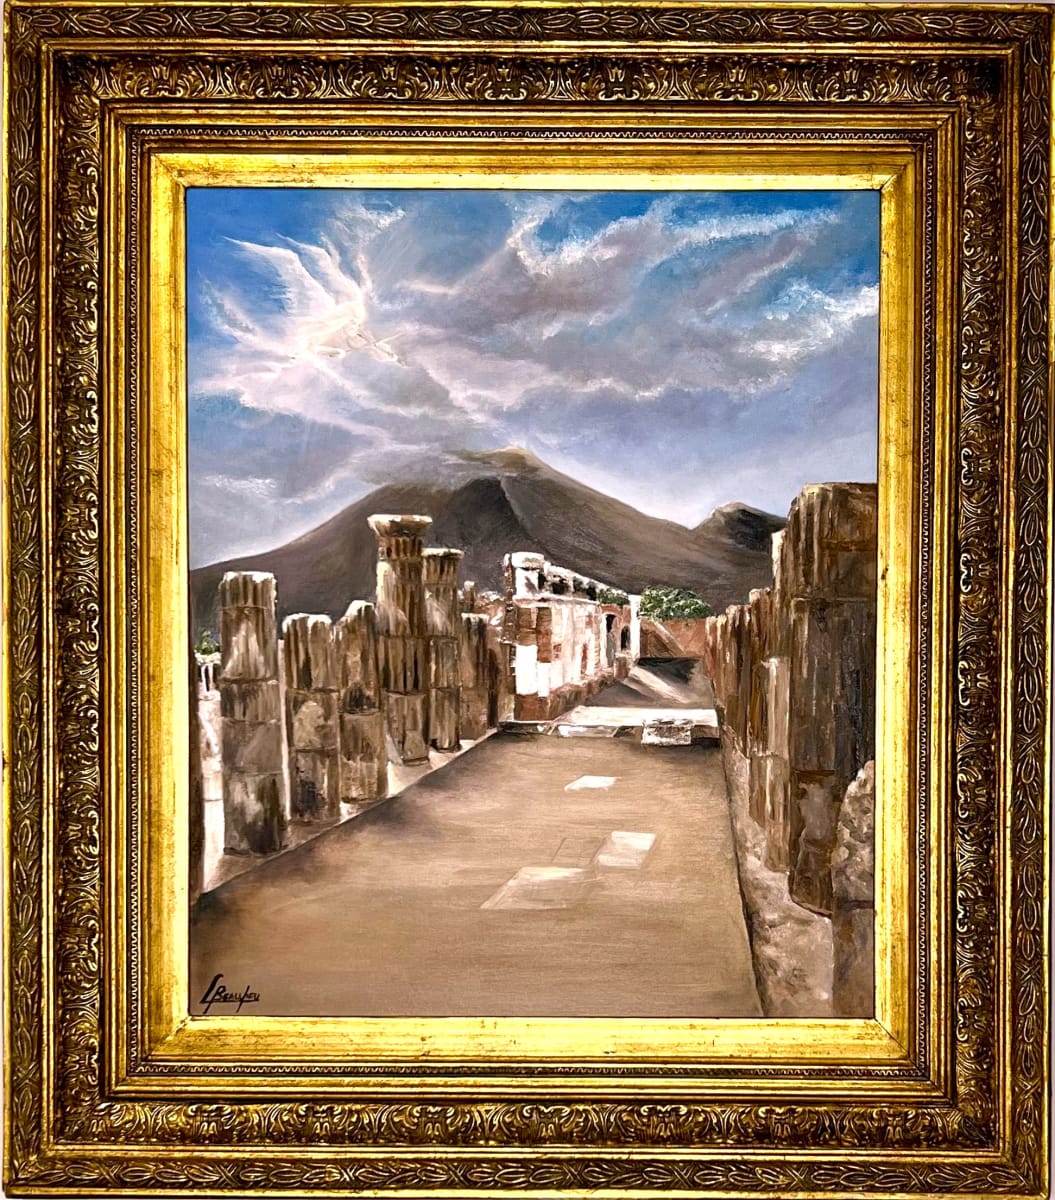 ´LOST SONG: POMPEII ‘ by Louise S Beaulieu  Image: Lost Song Pompeii Antique Framed